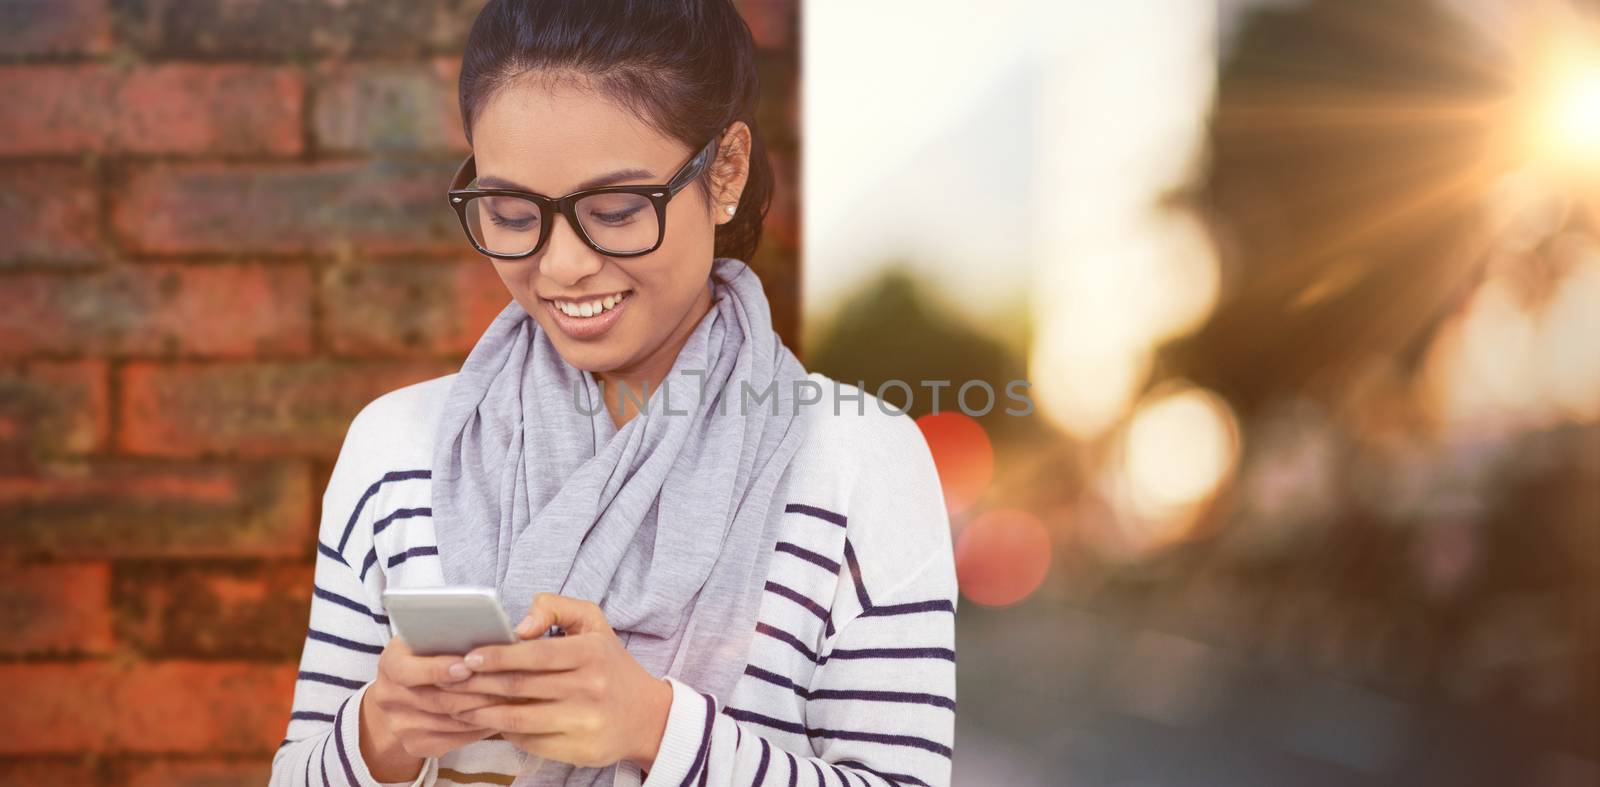 Smiling Asian woman using smartphone against wall of a house